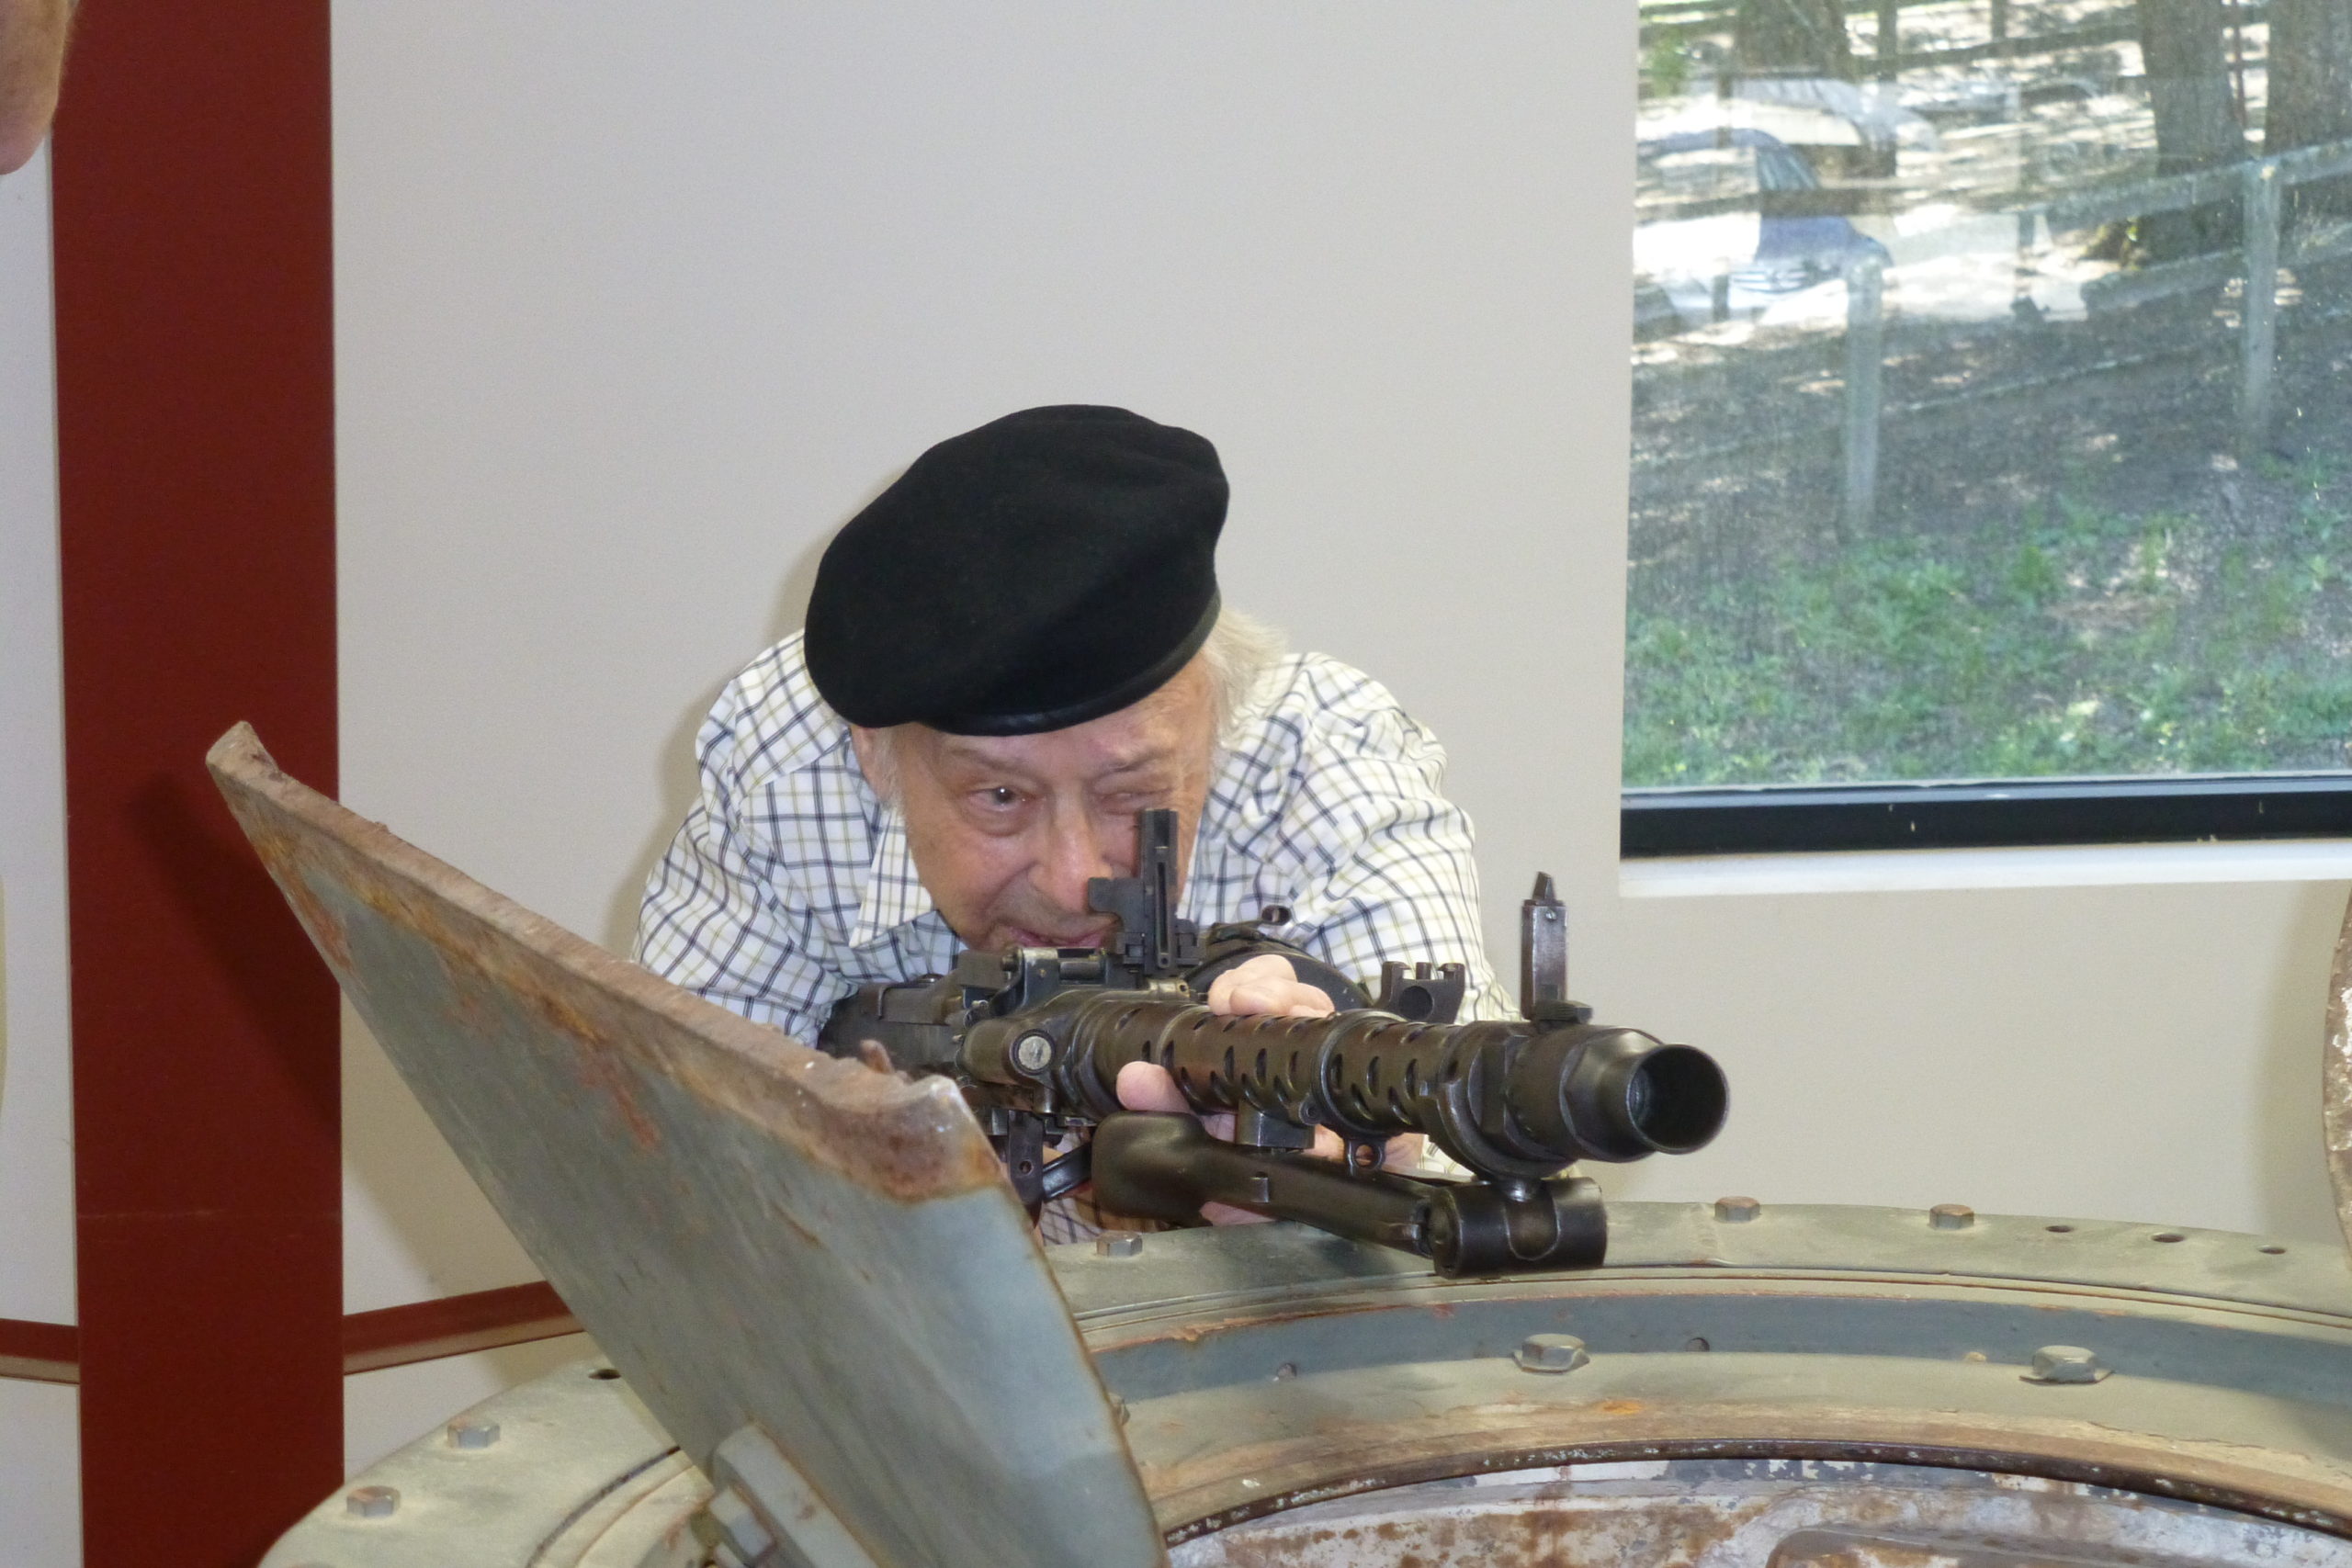 Charley Koenig aims an MG34 on top of the turret of a Panzer IV tank at the Jacques Littlefield private collection in 2013